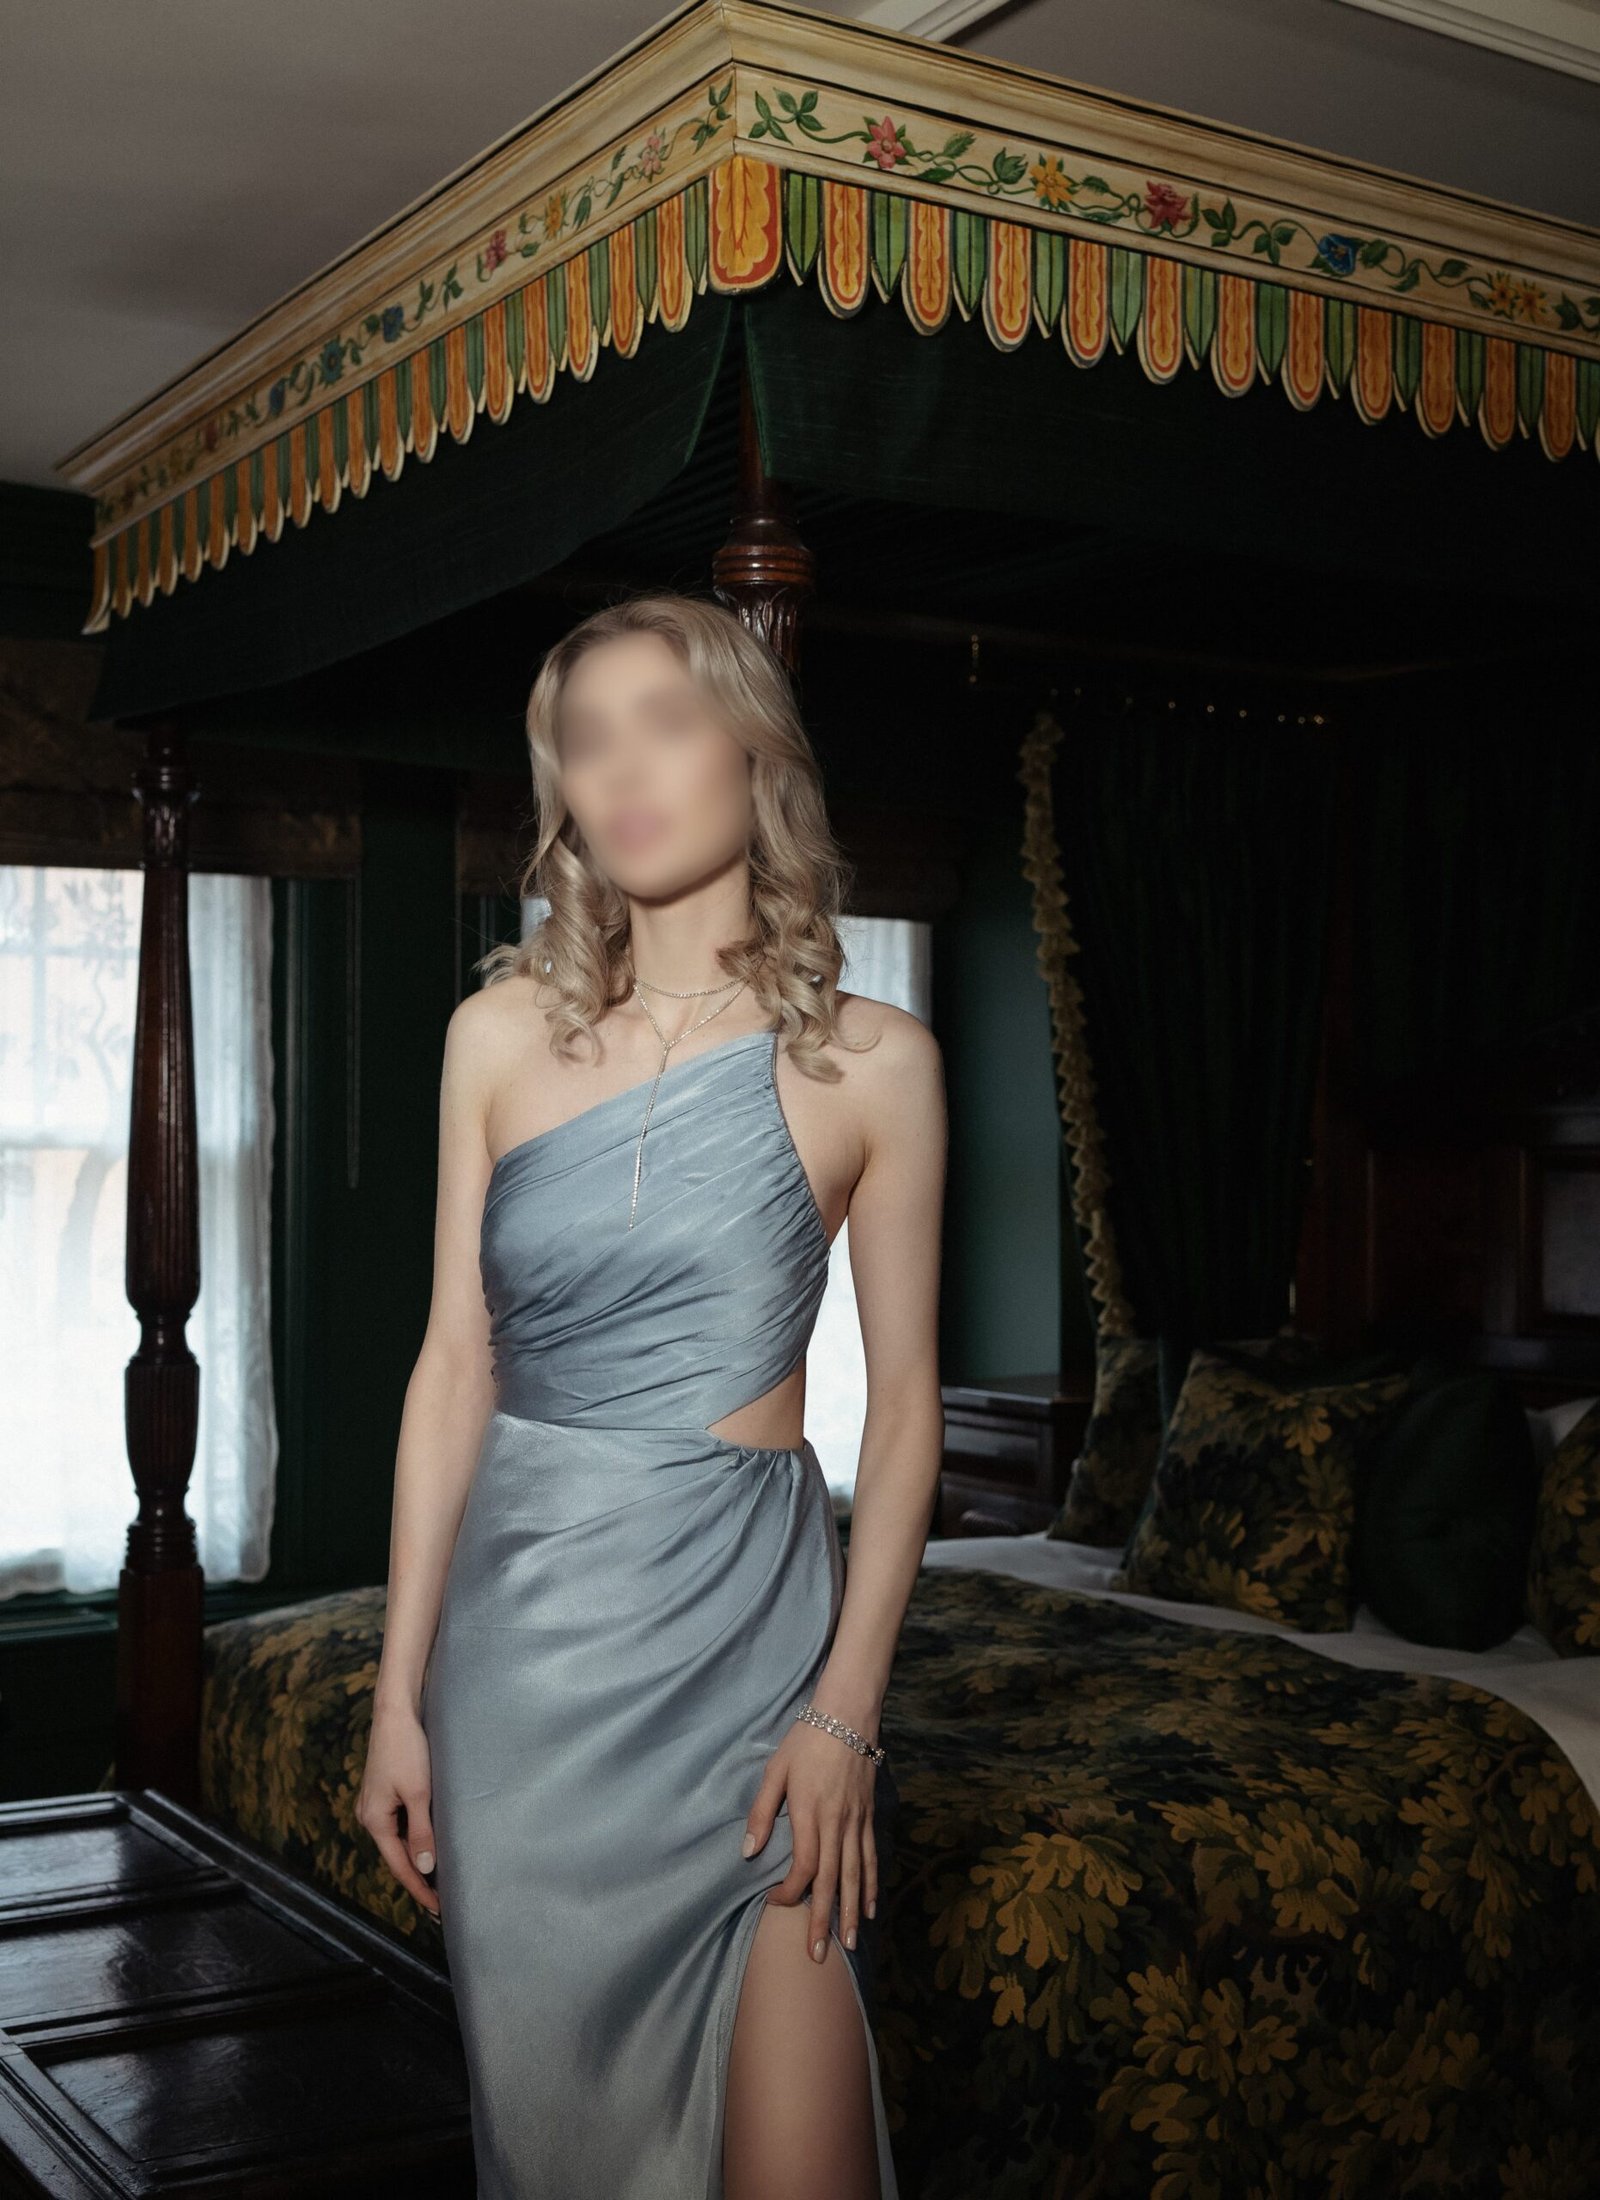 A young blonde woman standing in an opulent room with a classic four-poster bed adorned with a decorative green and floral canopy. They are dressed in an elegant, one-shoulder, silvery-blue gown with a tasteful side cut-out, a thigh-high slit, and are accessorized with a delicate necklace and bracelet. The room exudes an air of historical luxury, with dark wood furnishings and deep green drapery enhancing the stately ambiance.